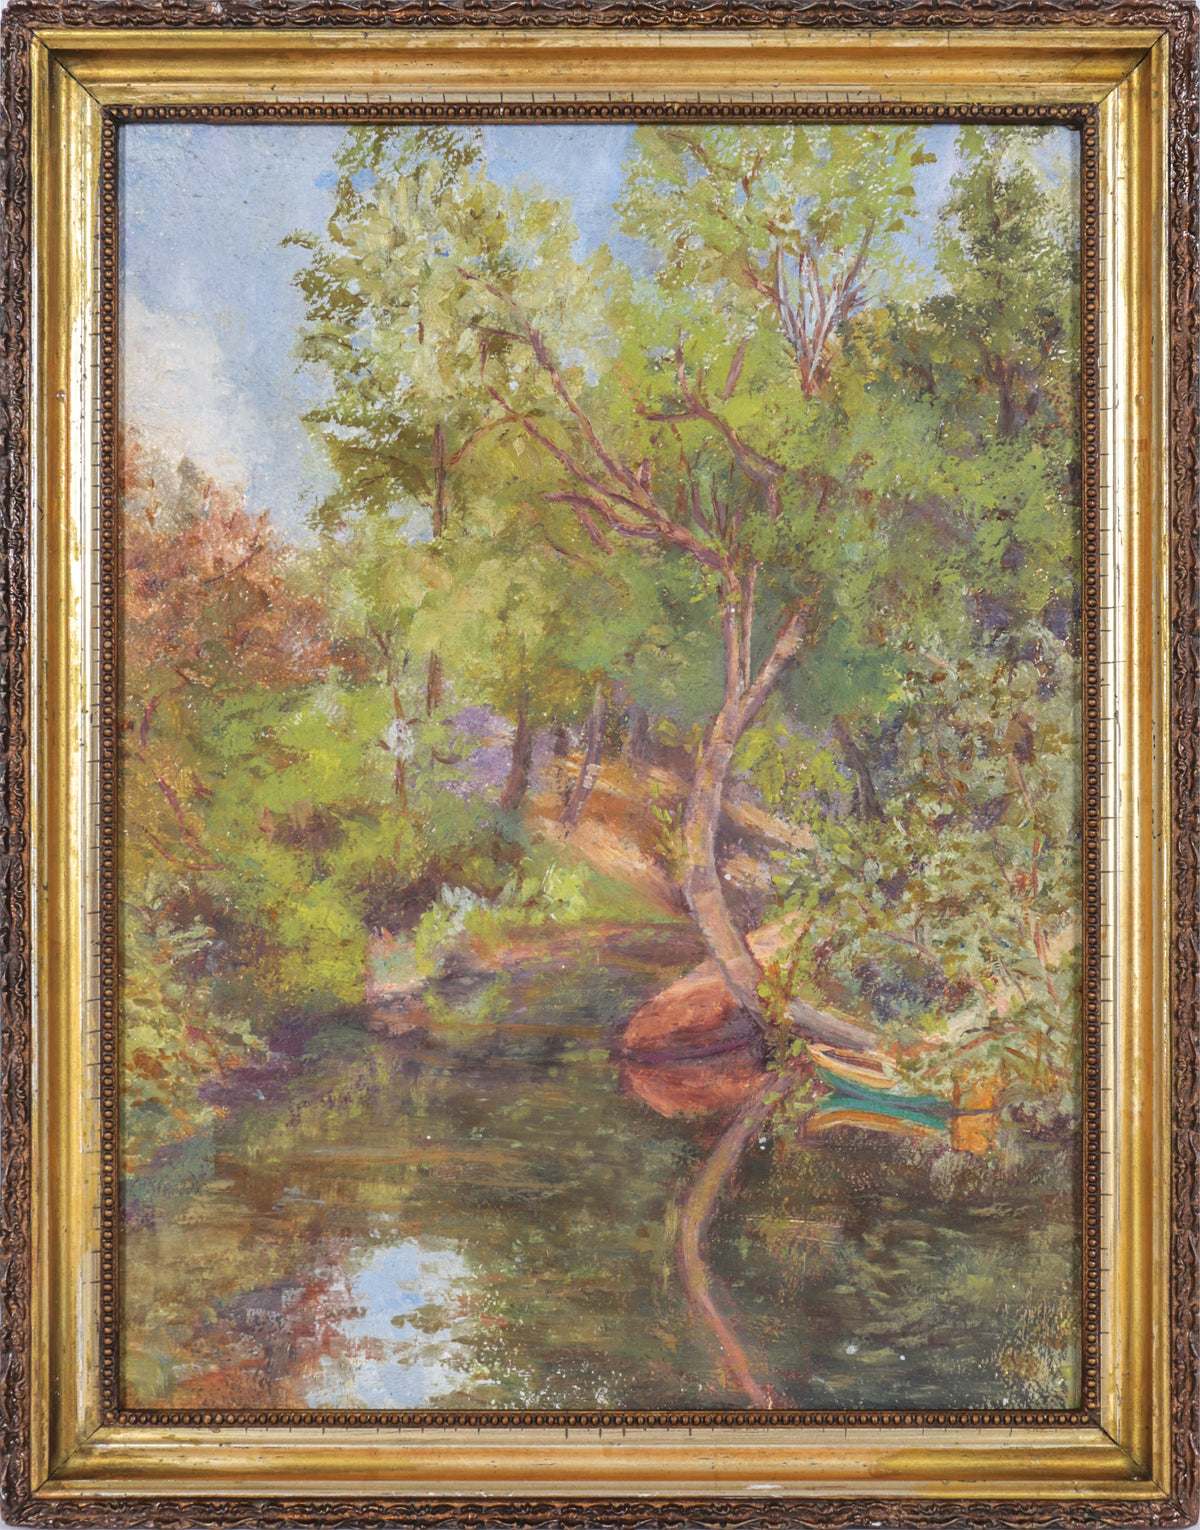 Idyllic Landscape by the River &lt;br&gt;Early 20th Century Oil &lt;br&gt;&lt;br&gt;#C0195